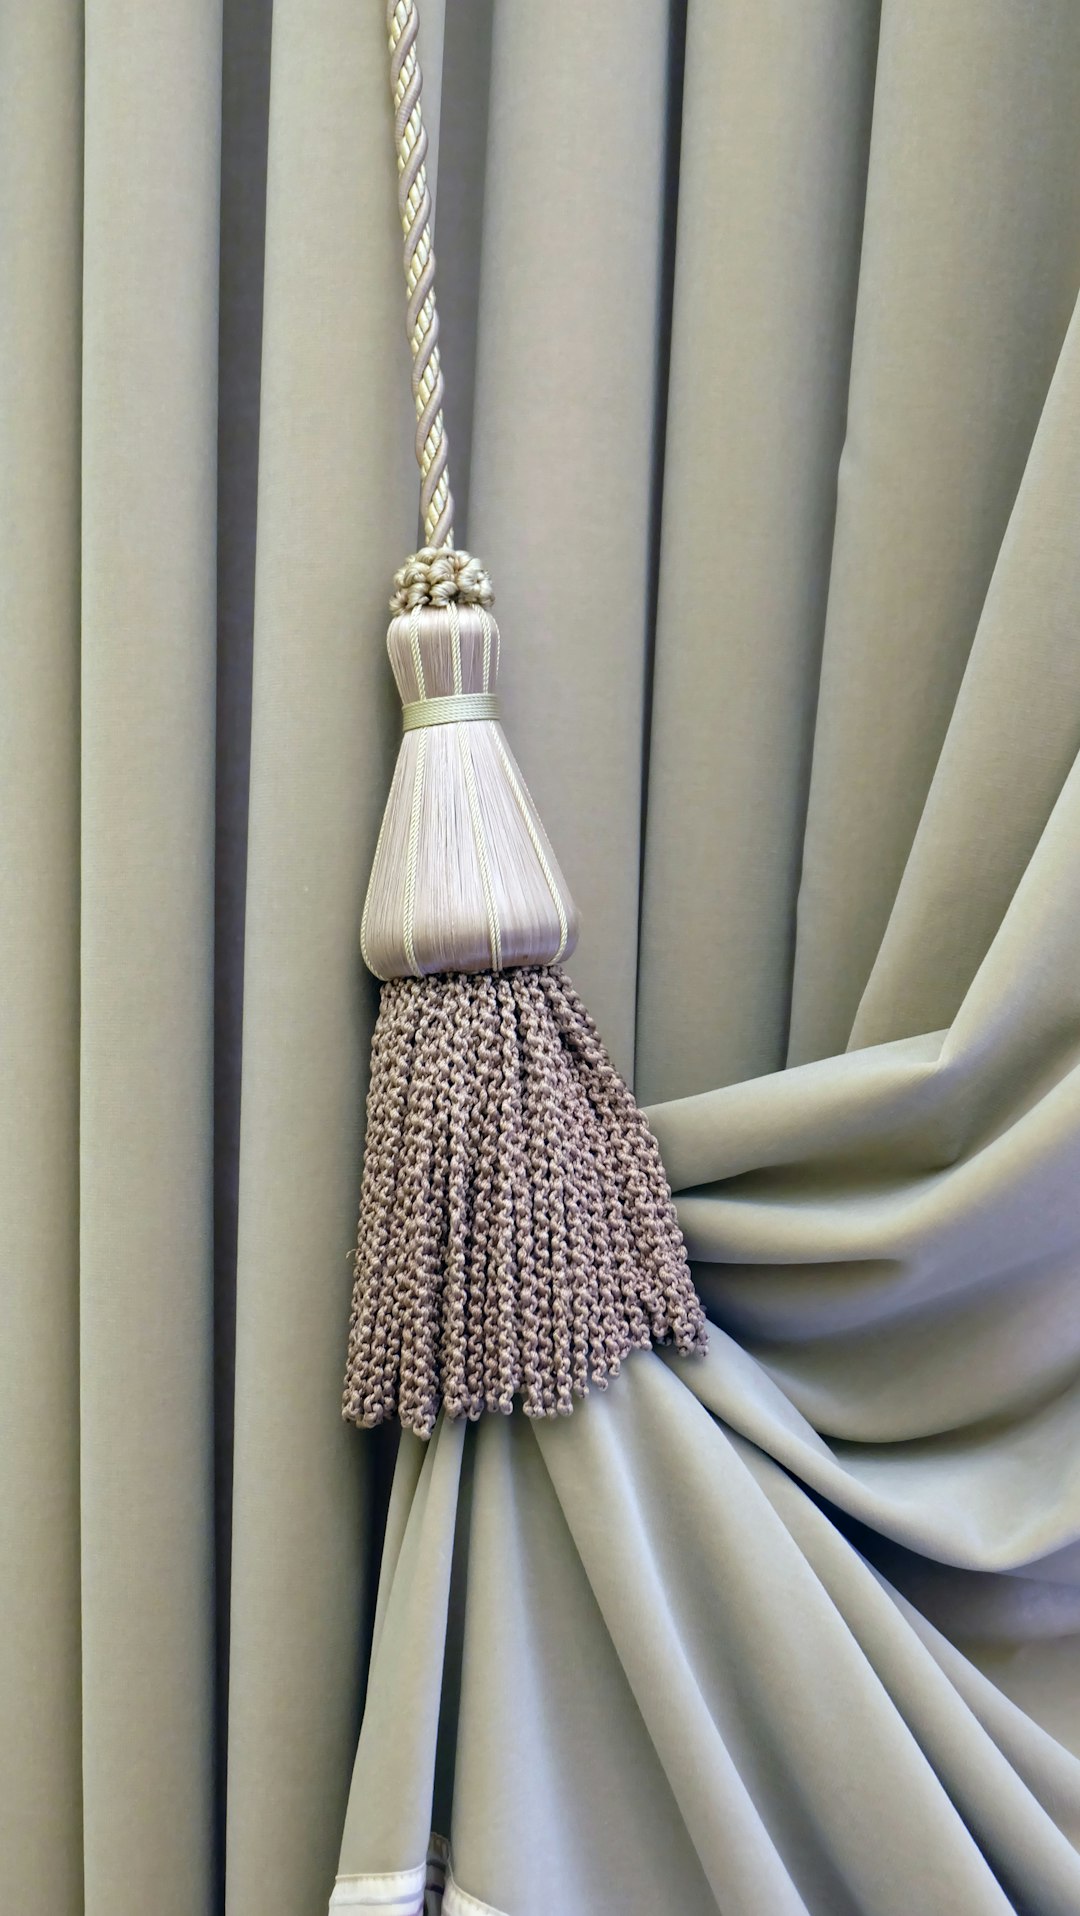  brown and white broom on white textile curtains